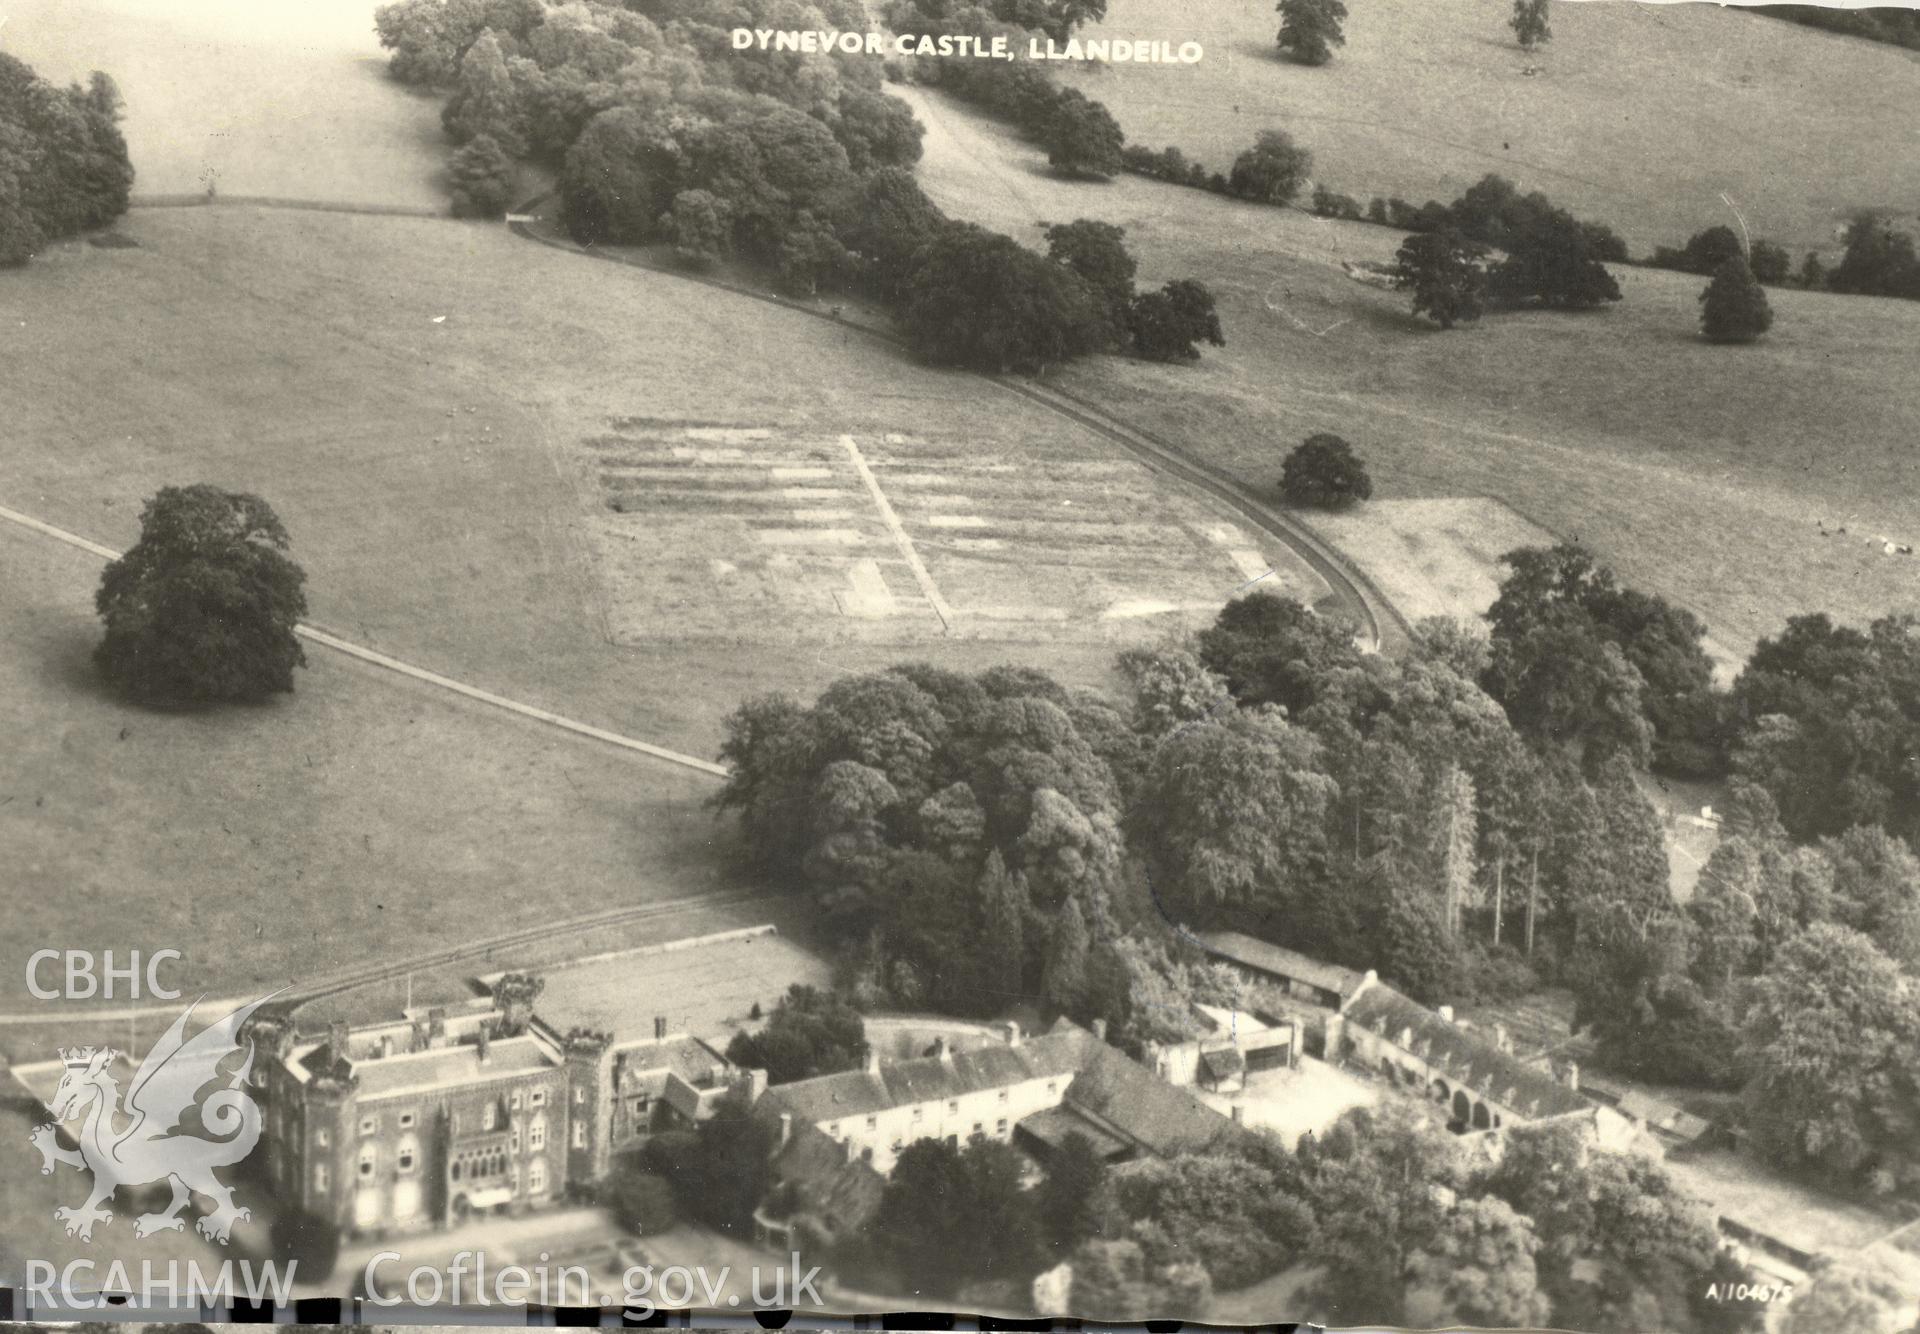 Digitised postcard image of aerial view of Newton House, Llandeilo, Aerofilms Ltd, London. Produced by Parks and Gardens Data Services, from an original item in the Peter Davis Collection at Parks and Gardens UK. We hold only web-resolution images of this collection, suitable for viewing on screen and for research purposes only. We do not hold the original images, or publication quality scans.